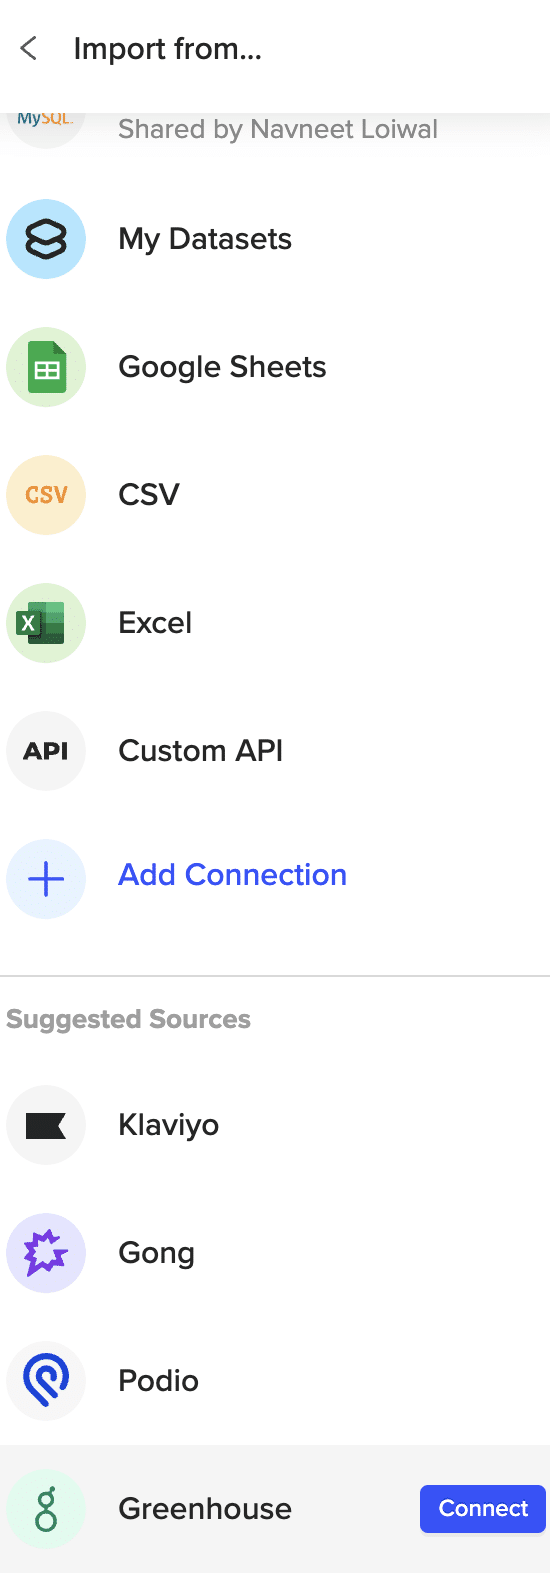 Locating and connecting to Greenhouse in the Coefficient dropdown menu in Google Sheets.